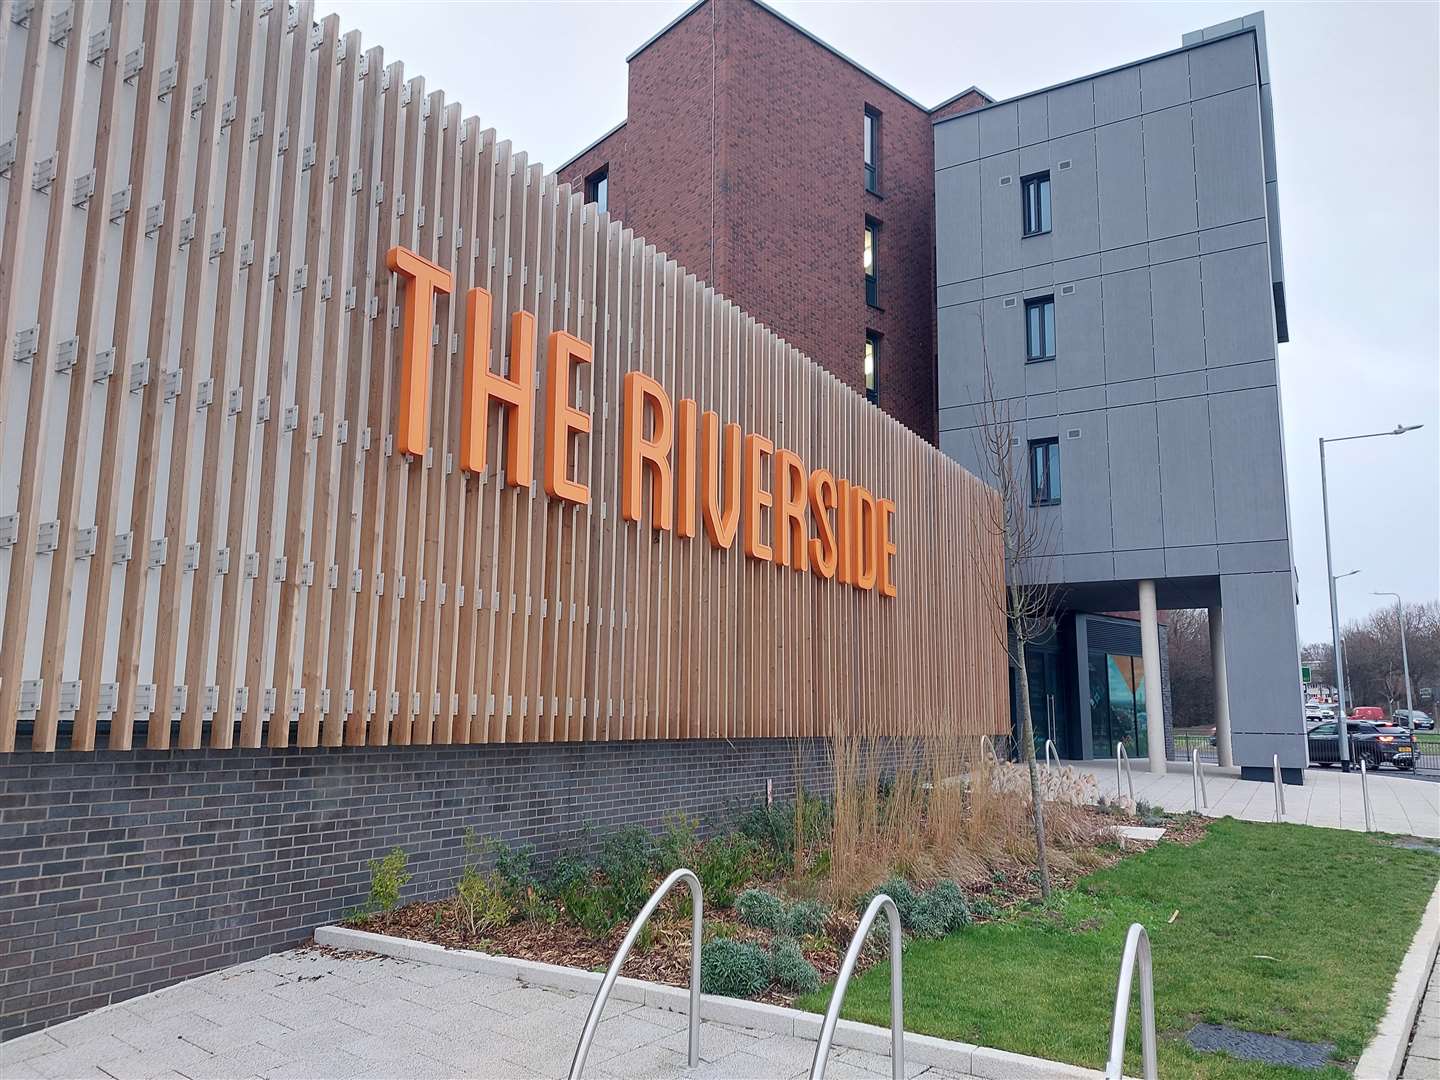 The Riverside development is a £115 million council-owned leisure complex